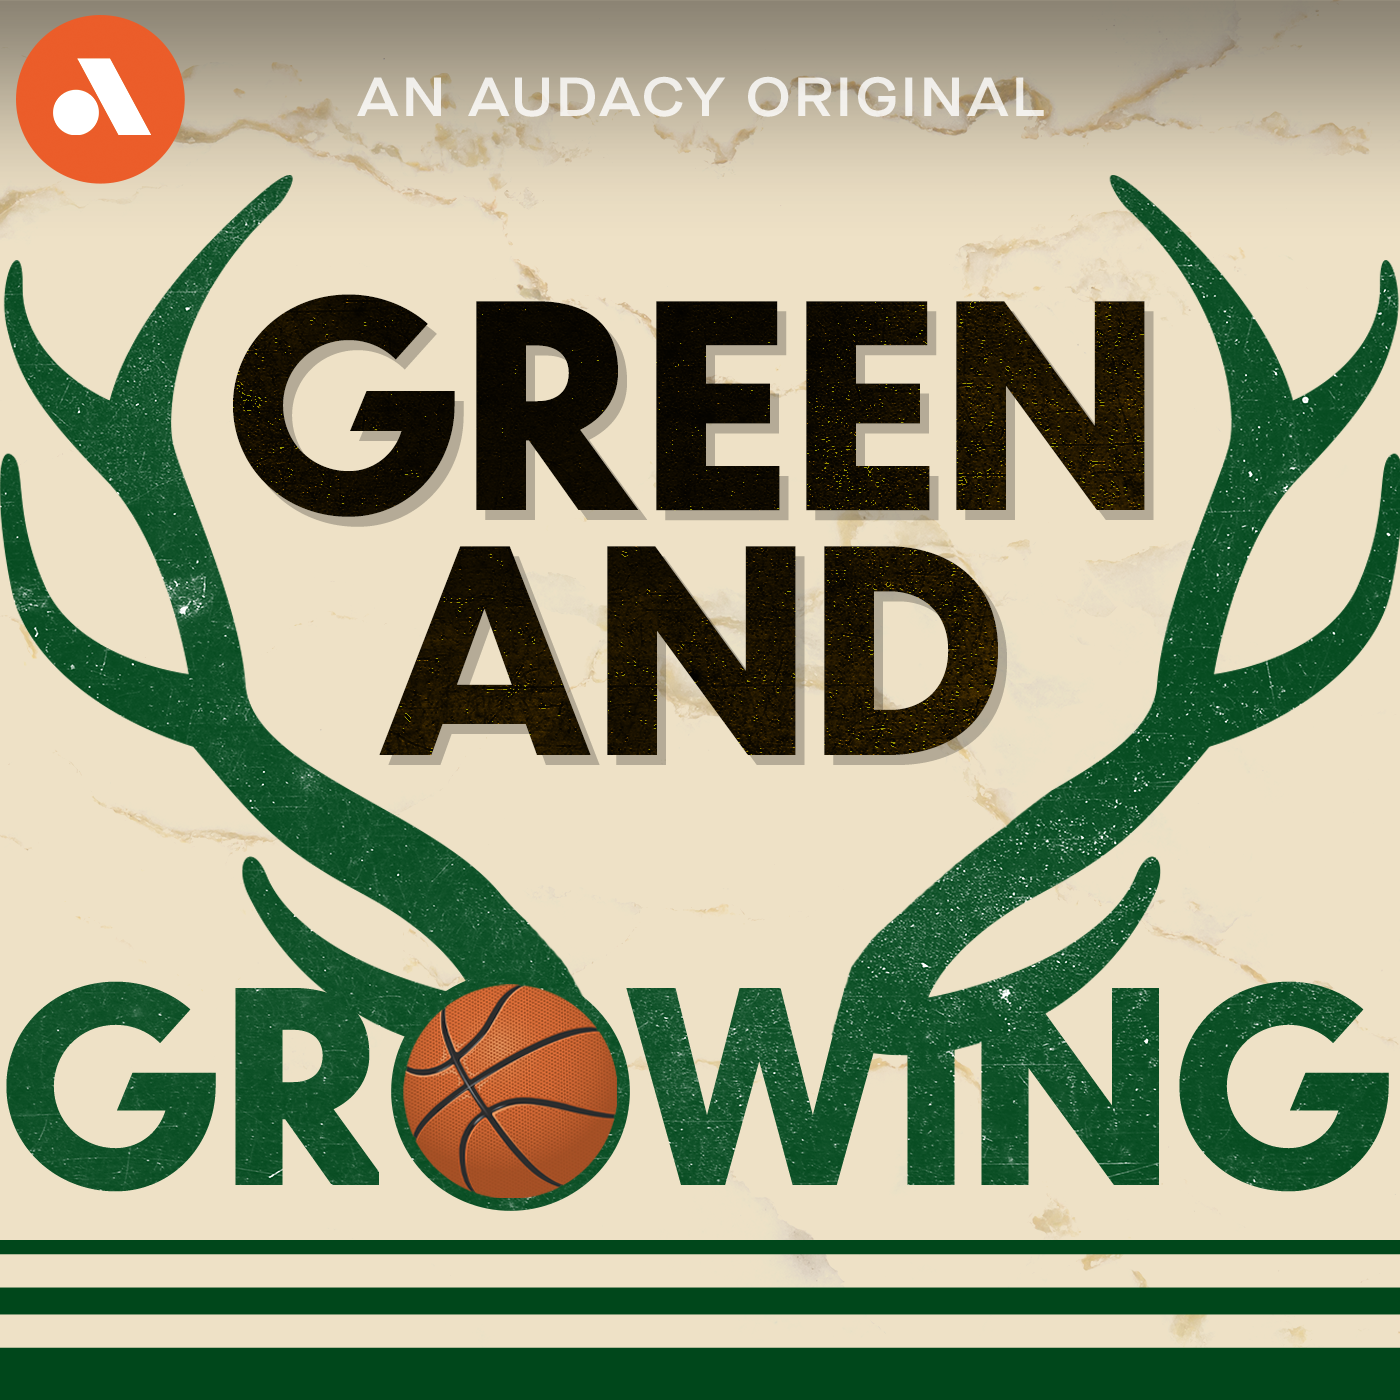 BONUS: What has been Giannis' biggest career mistake as a member of the Milwaukee Bucks? | Green and Growing